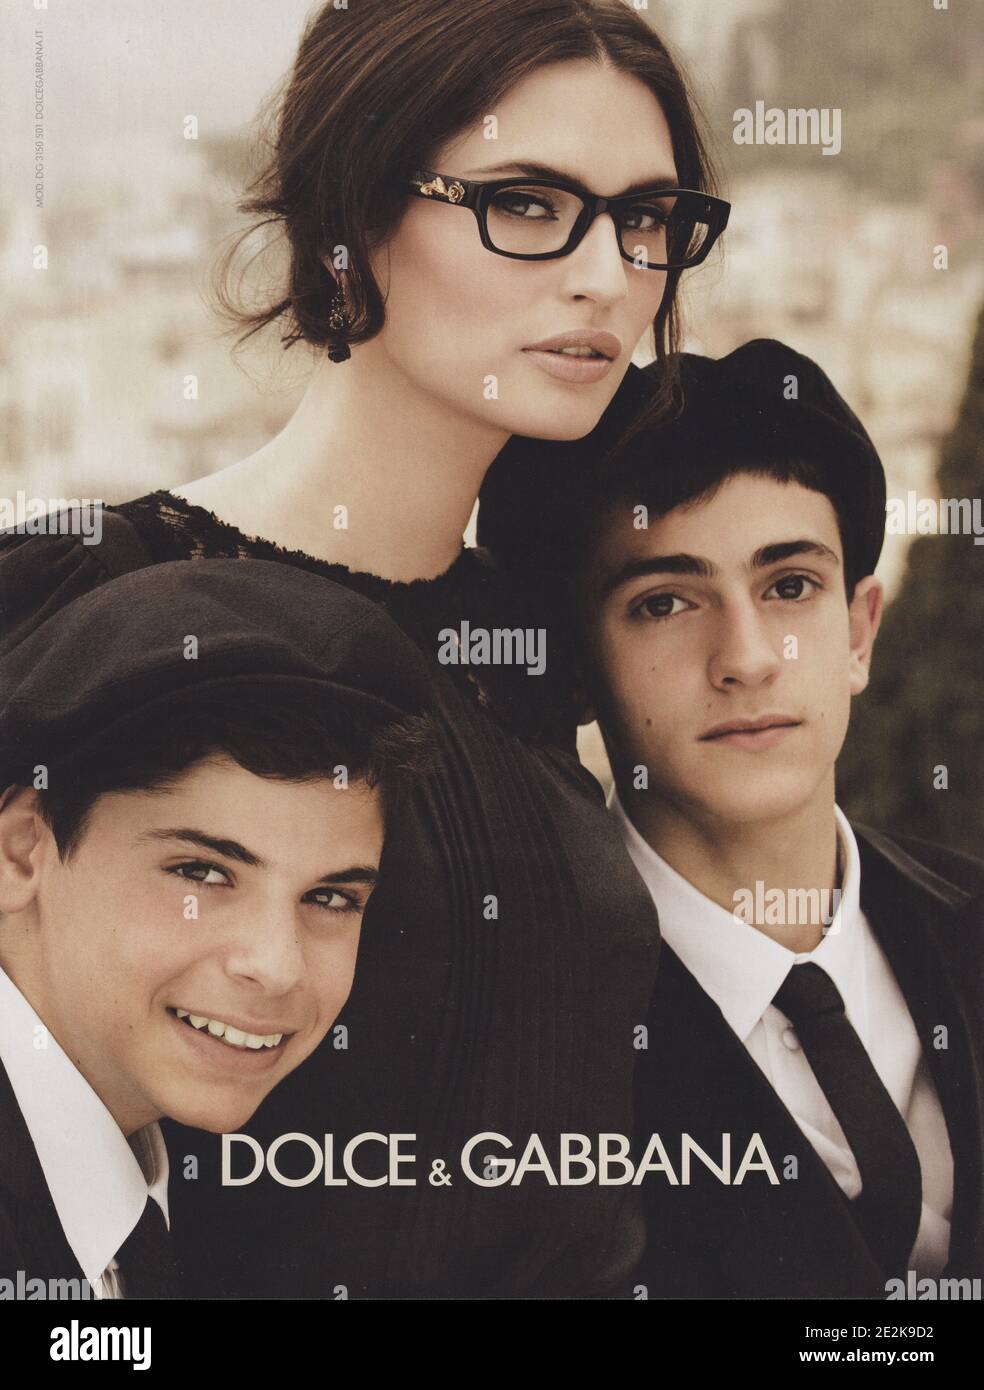 poster advertising Dolce & Gabbana fashion house in paper magazine from ...